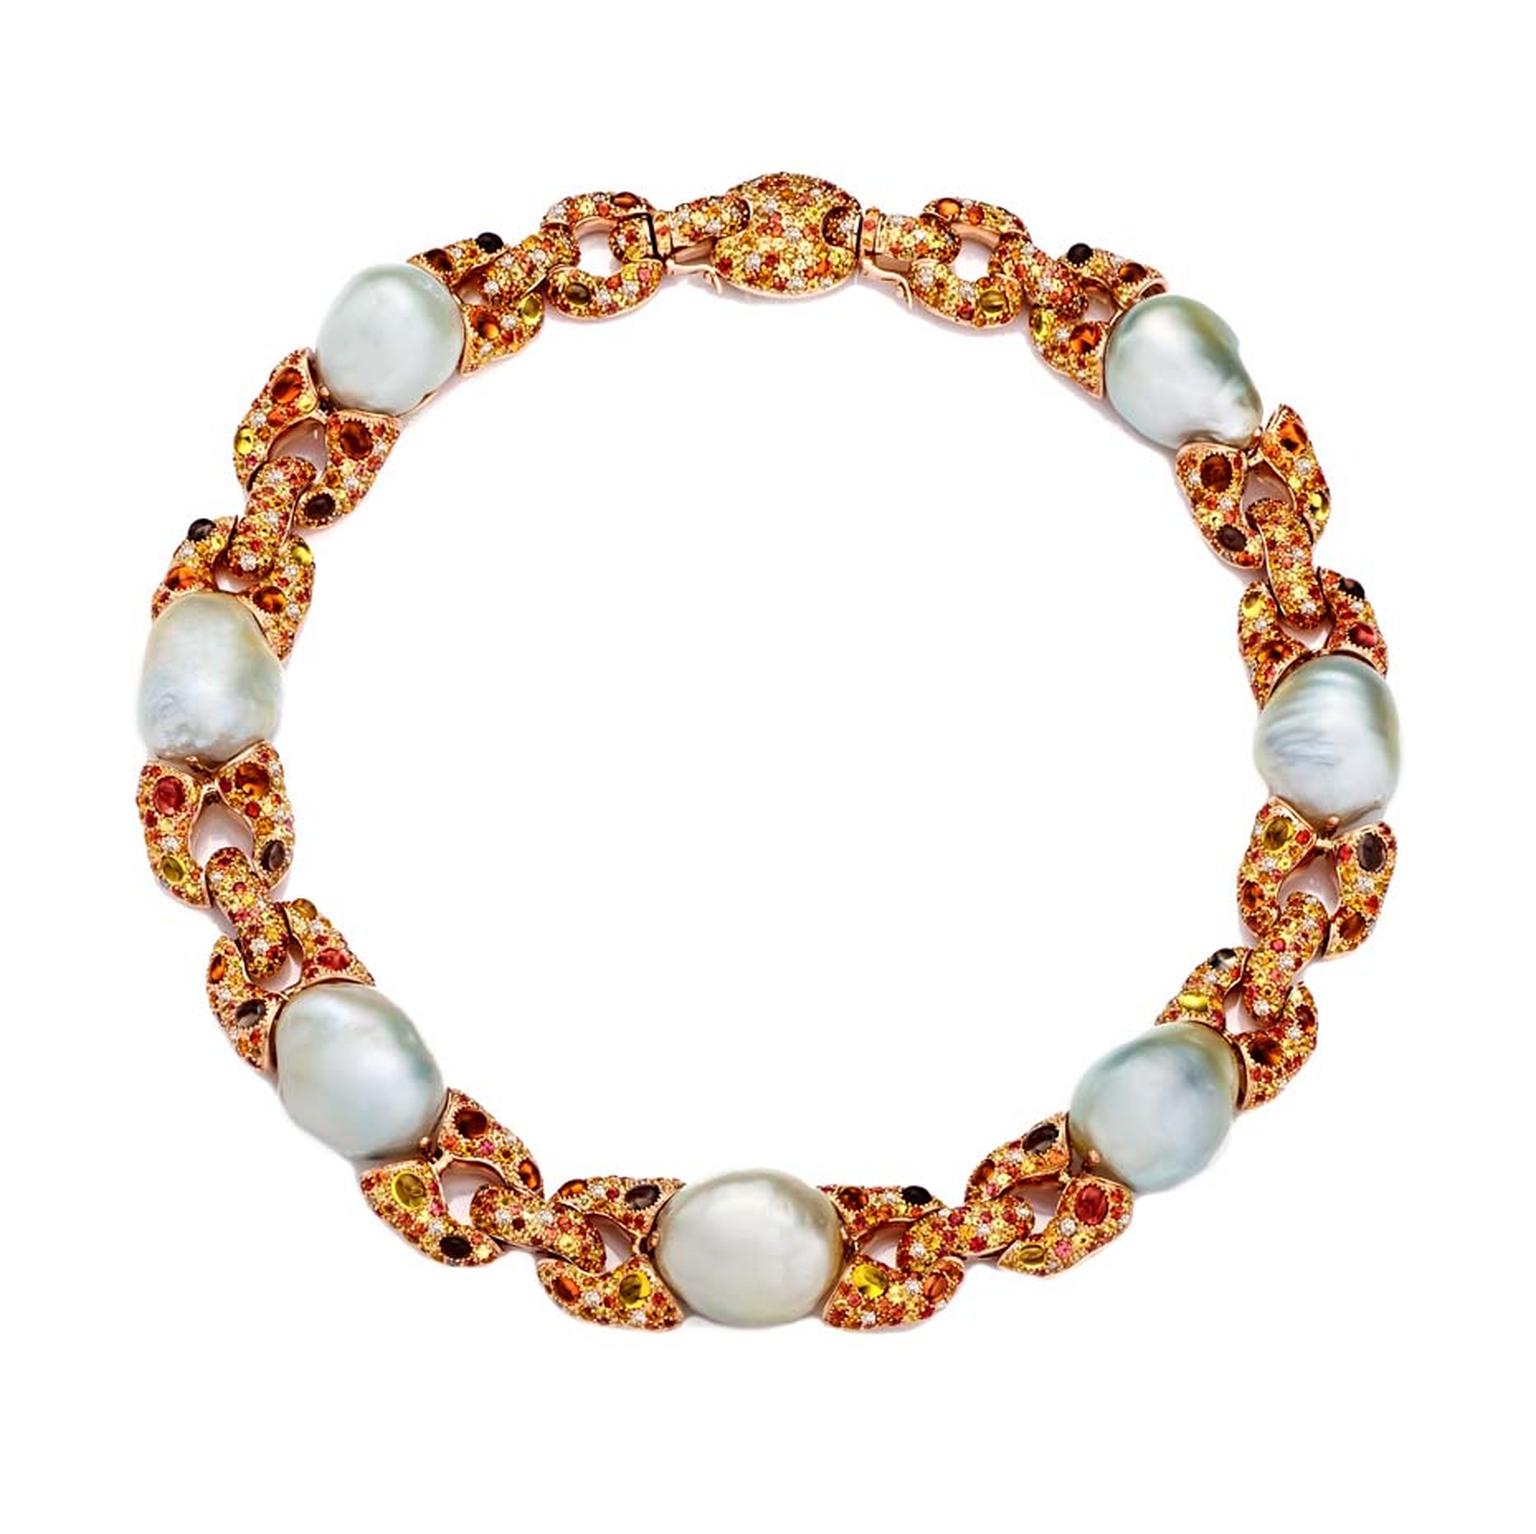 Margot McKinney necklace set with baroque Australian South Sea pearls, cabochon citrines, smoky topaz, yellow sapphires and diamonds.